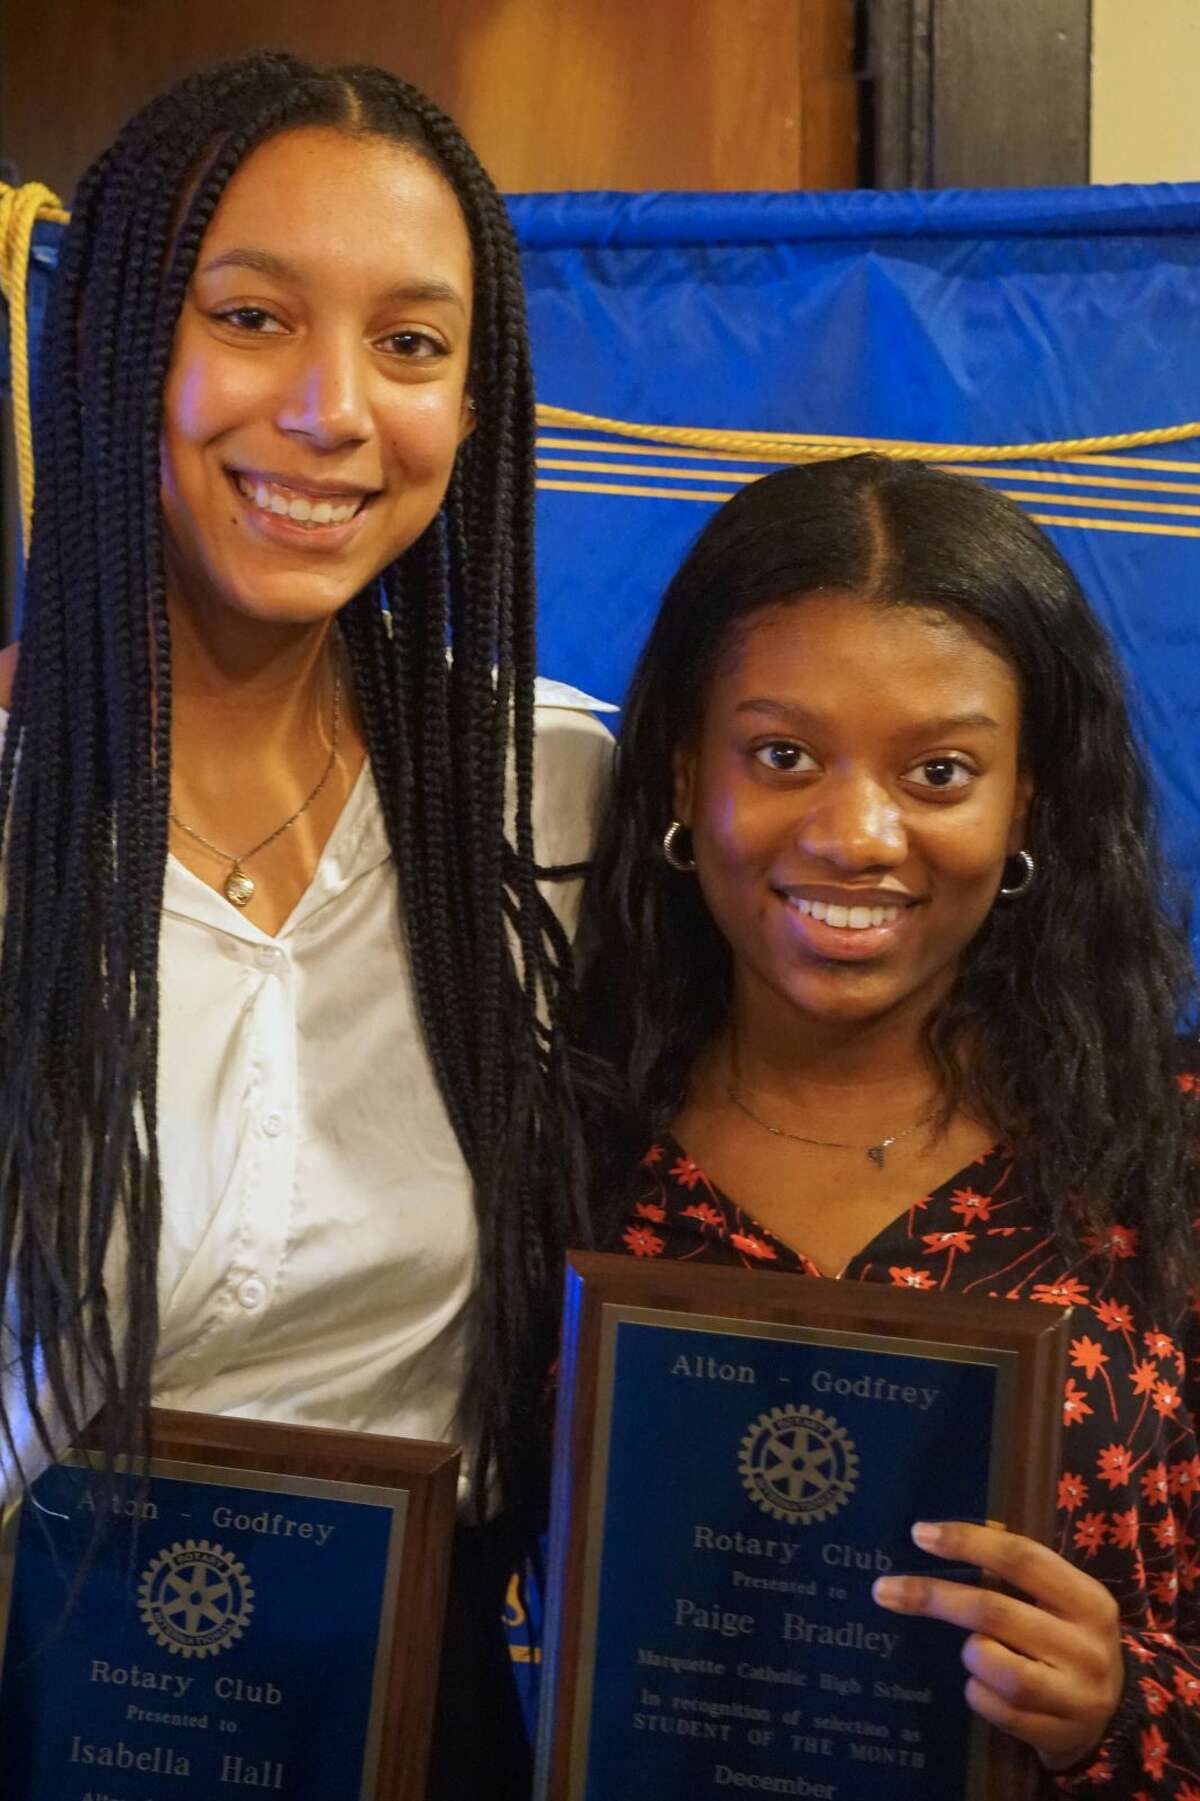 Isabella Hall of Alton High School, left, and Paige Bradley of Marquette Catholic High School have been named Students of the Month for December by the Alton-Godfrey Rotary Club.